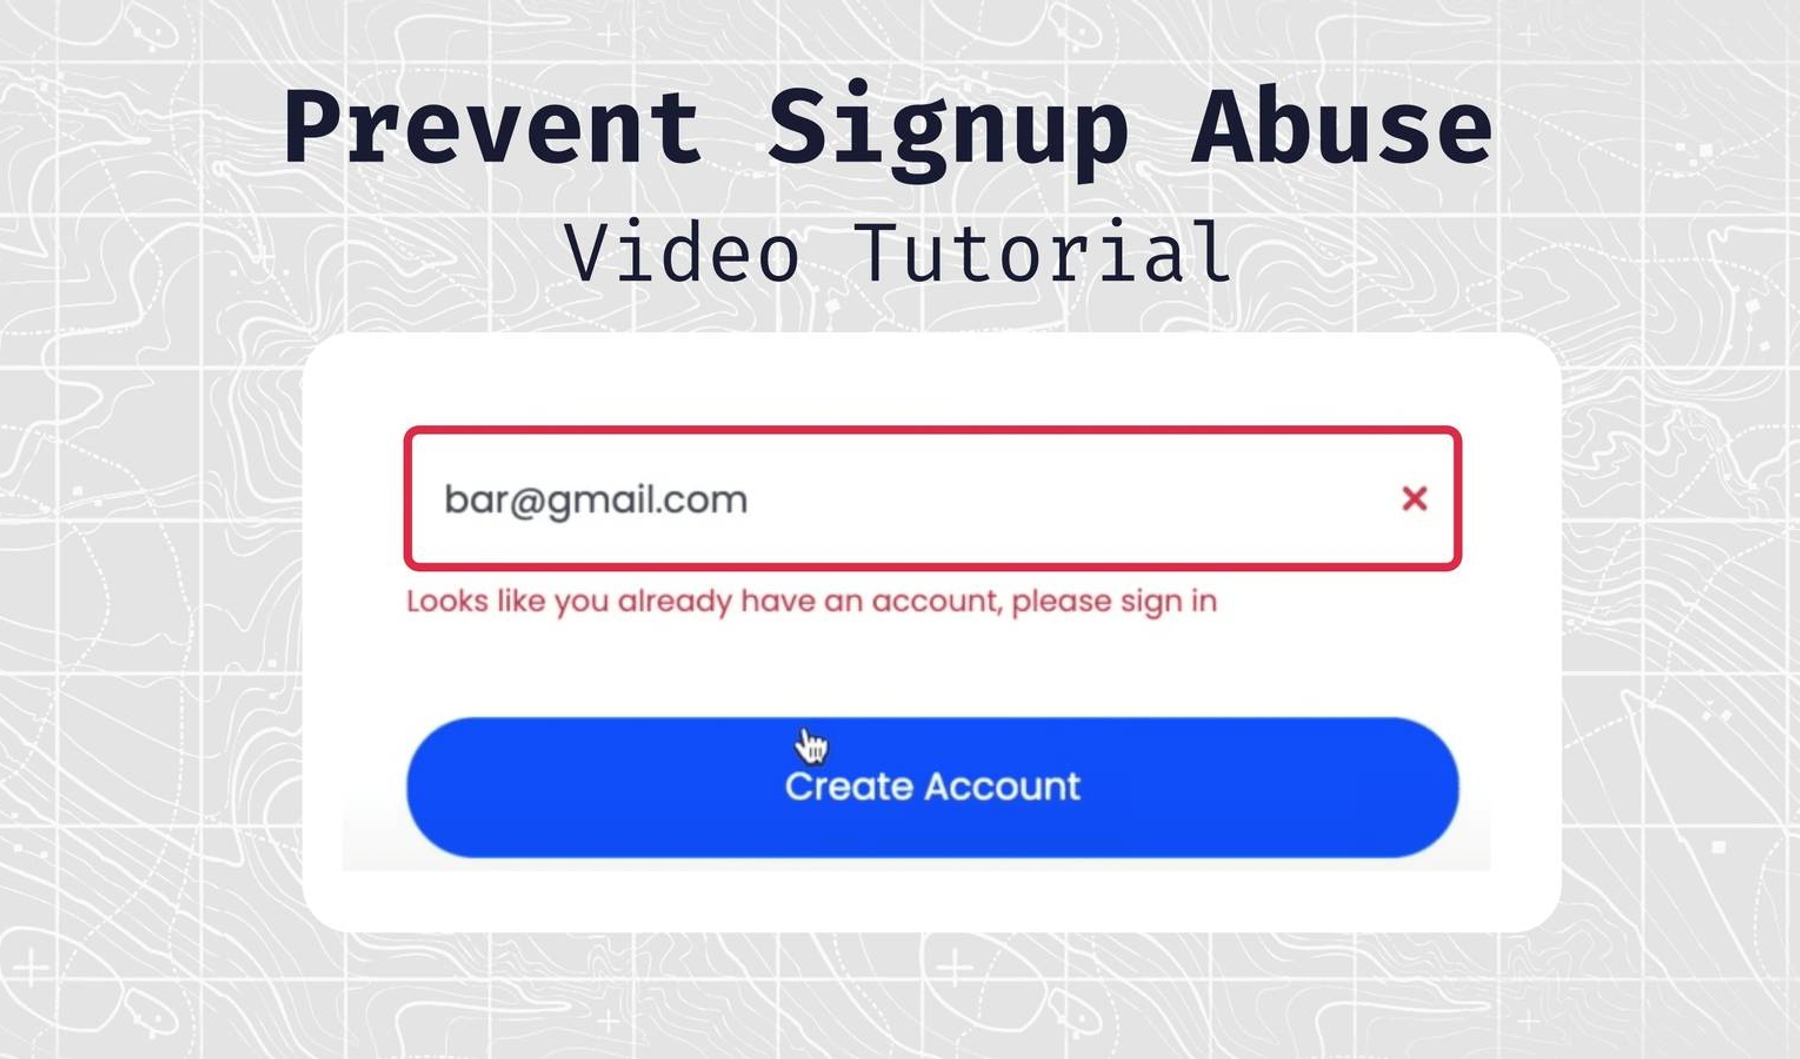 Prevent signup abuse video tutorial